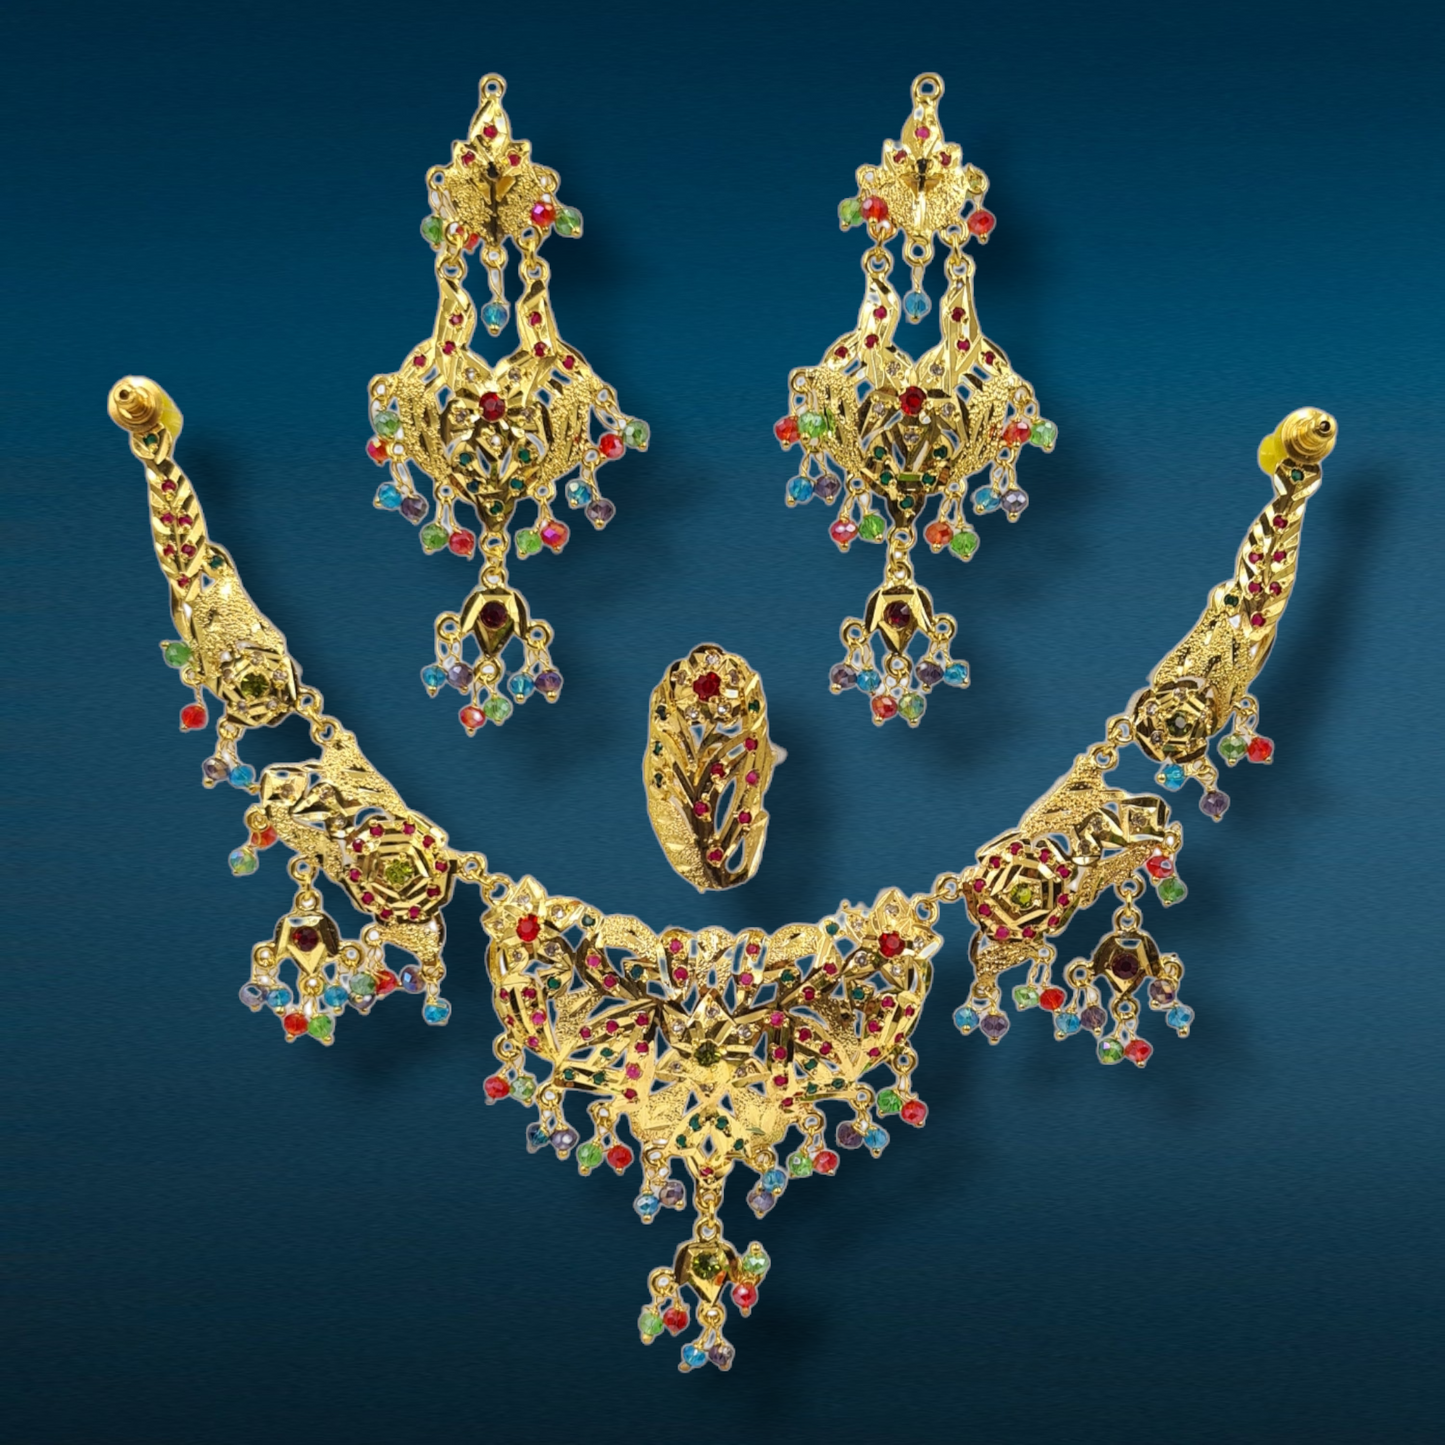 "Exquisite Multicolor Stone Jadau Necklace, Ring, and Jewelry Set"